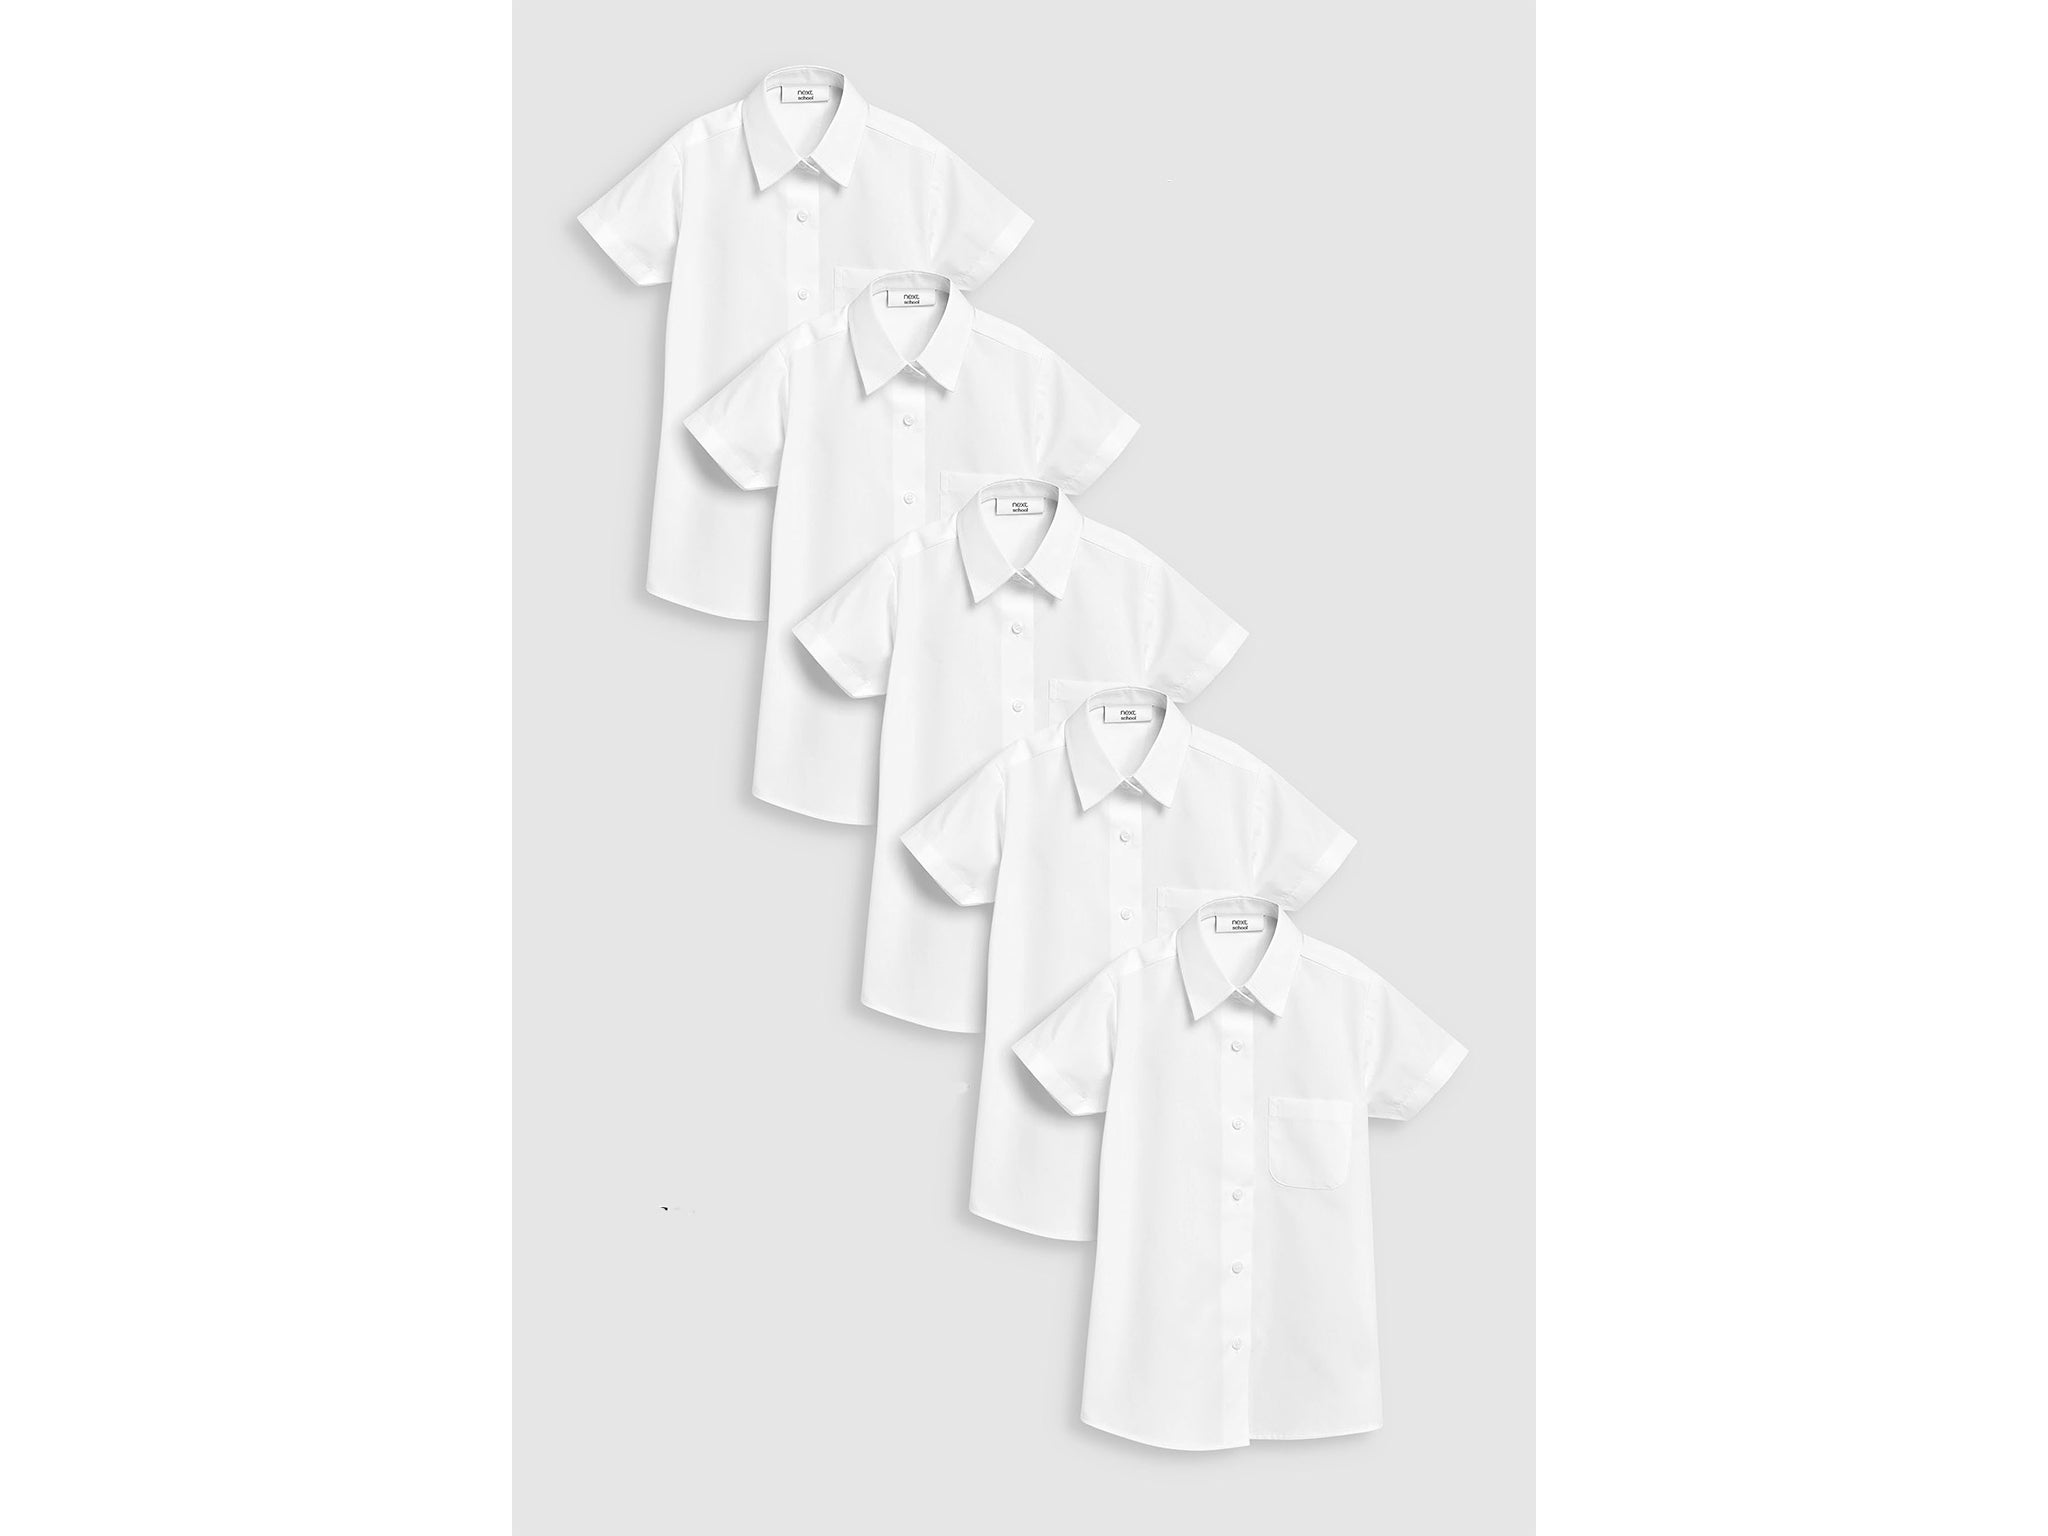 This five-pack has one shirt for every day of the week